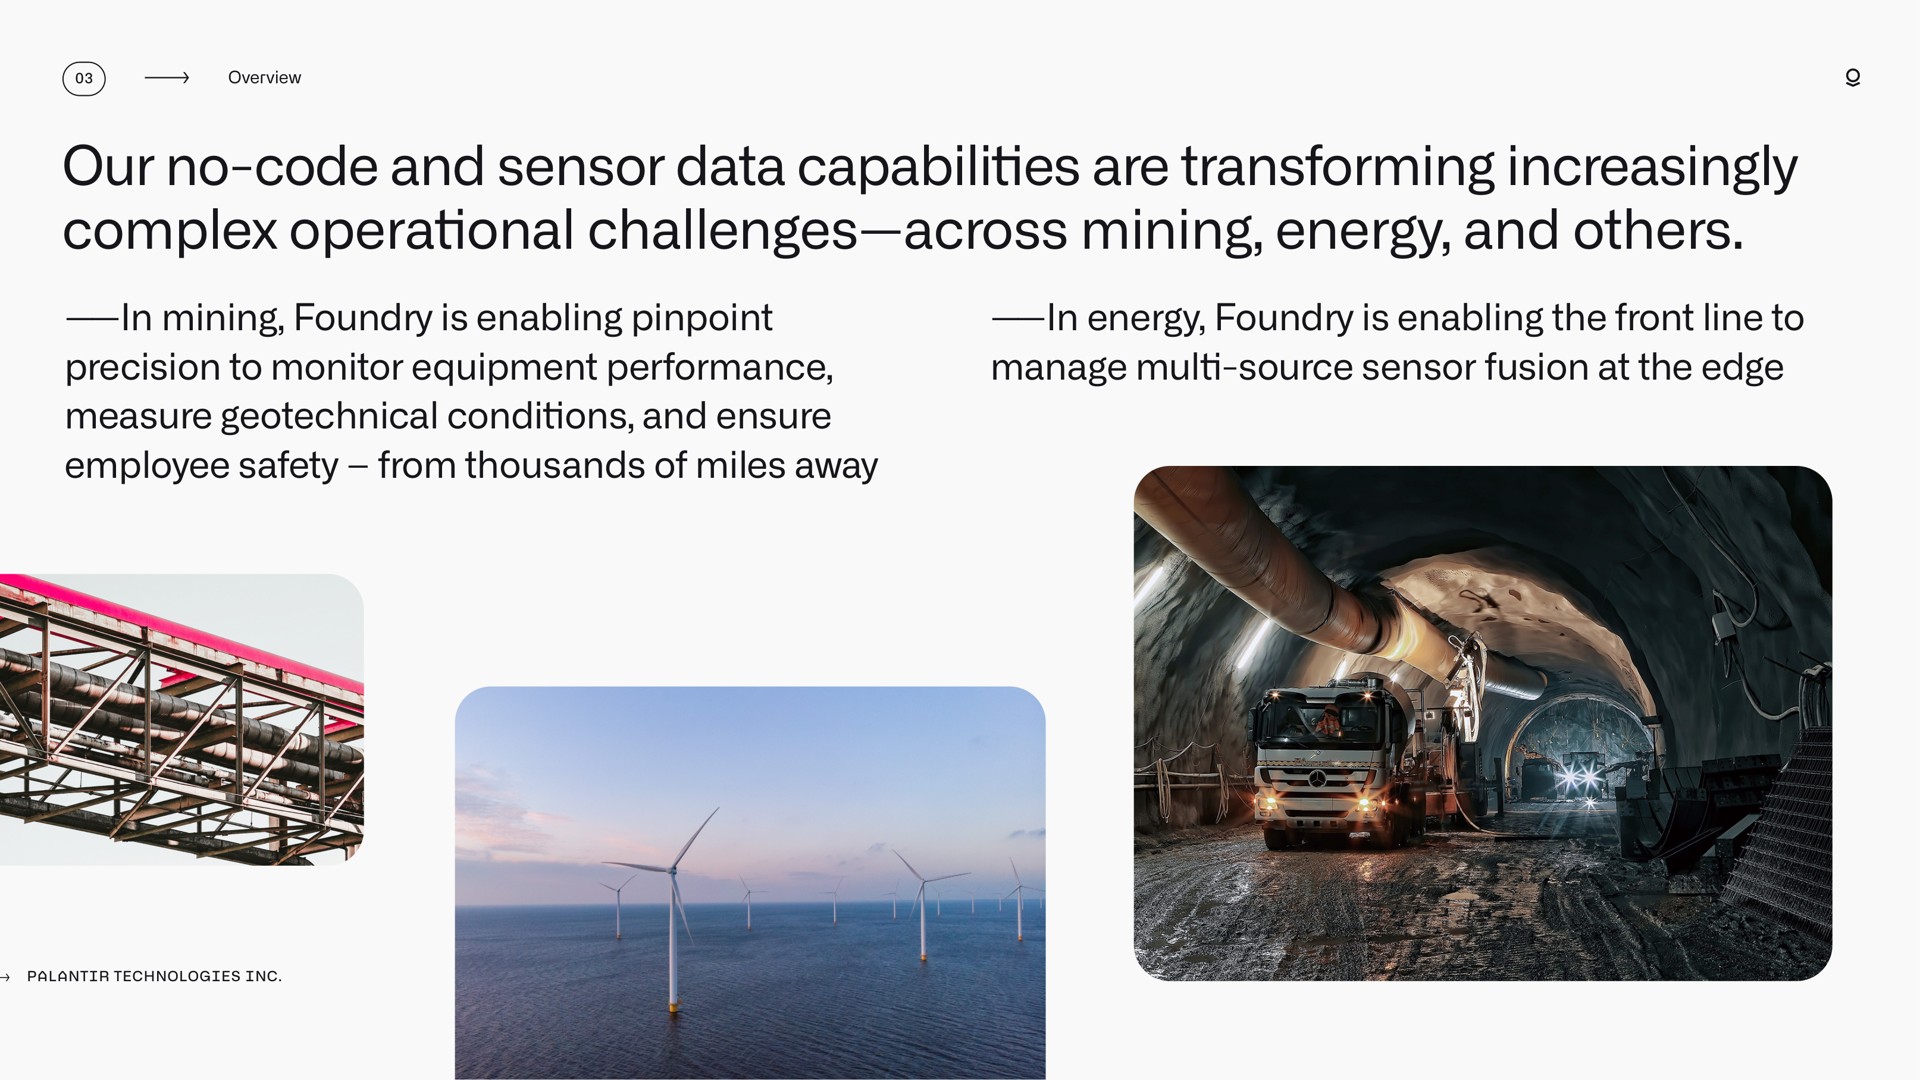 our no code and sensor data capabilities are transforming increasingly complex operational challenges across mining energy and in mining foundry is enabling pinpoint precision to monitor equipment performance measure conditions and ensure employee safety from thousands of miles away in energy foundry is enabling the front line to manage source sensor fusion at the edge lin | Palantir